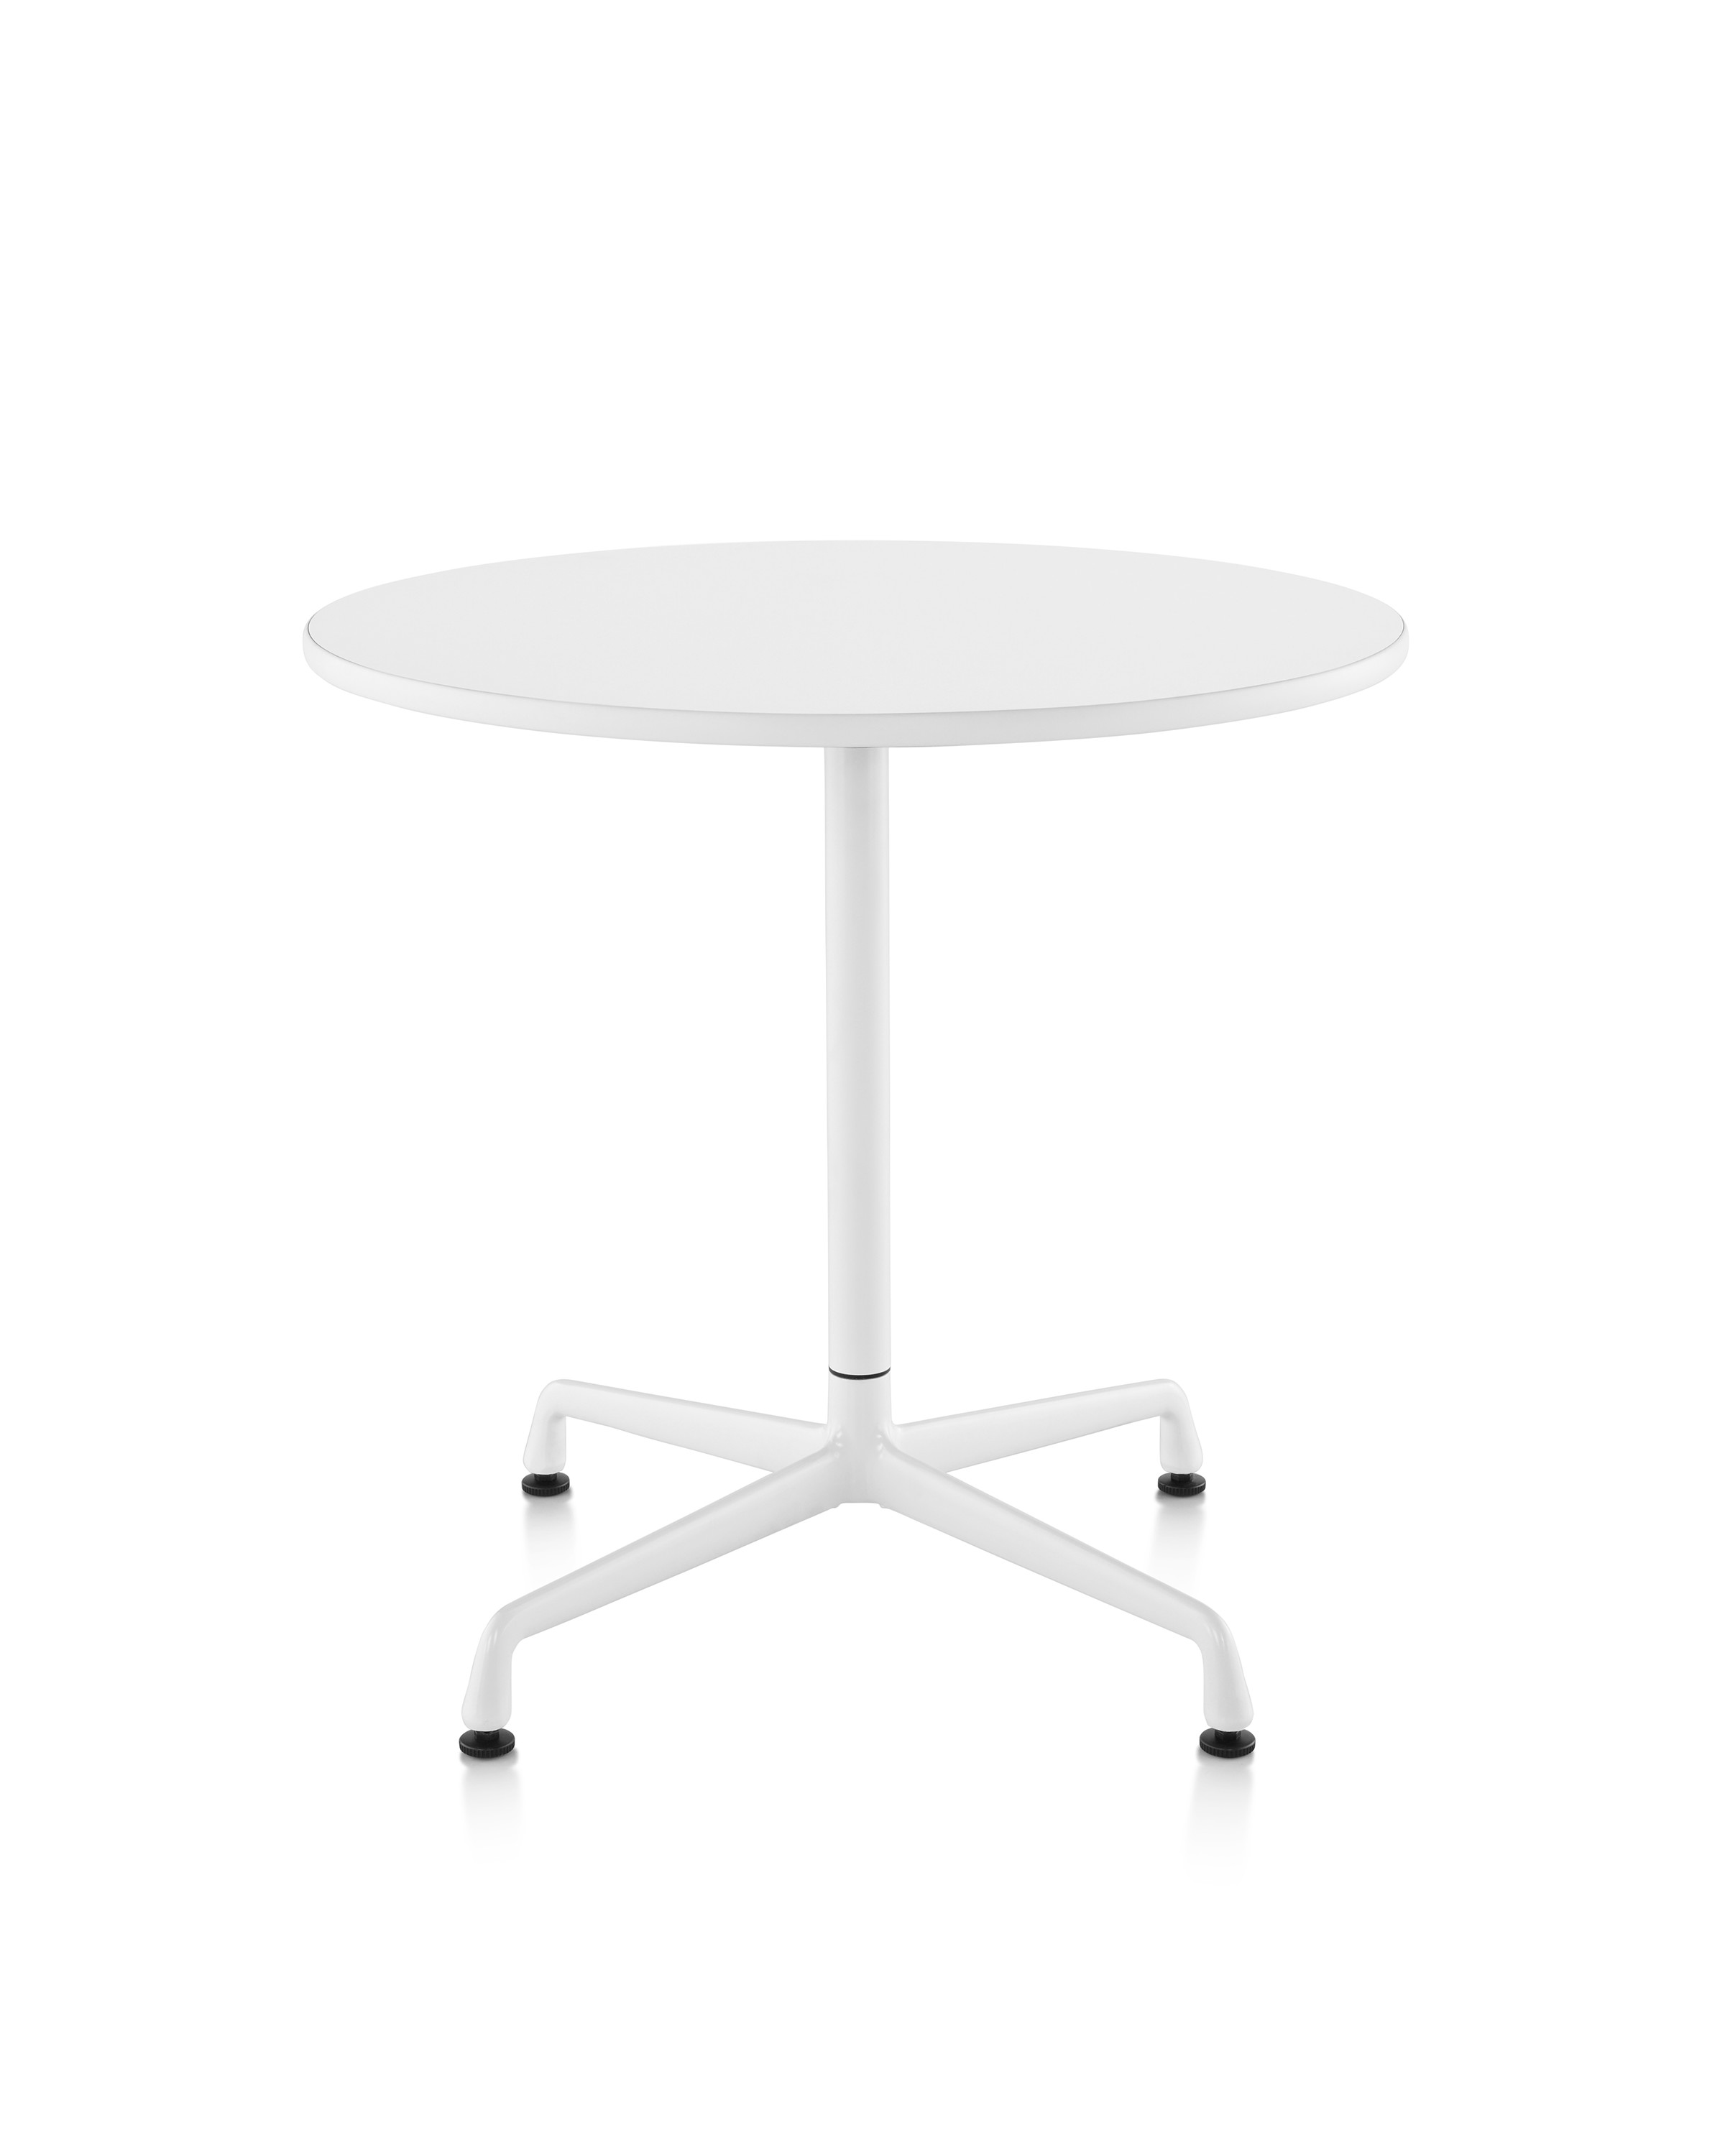 Eames Round Table Universal Base, Eames Table Round